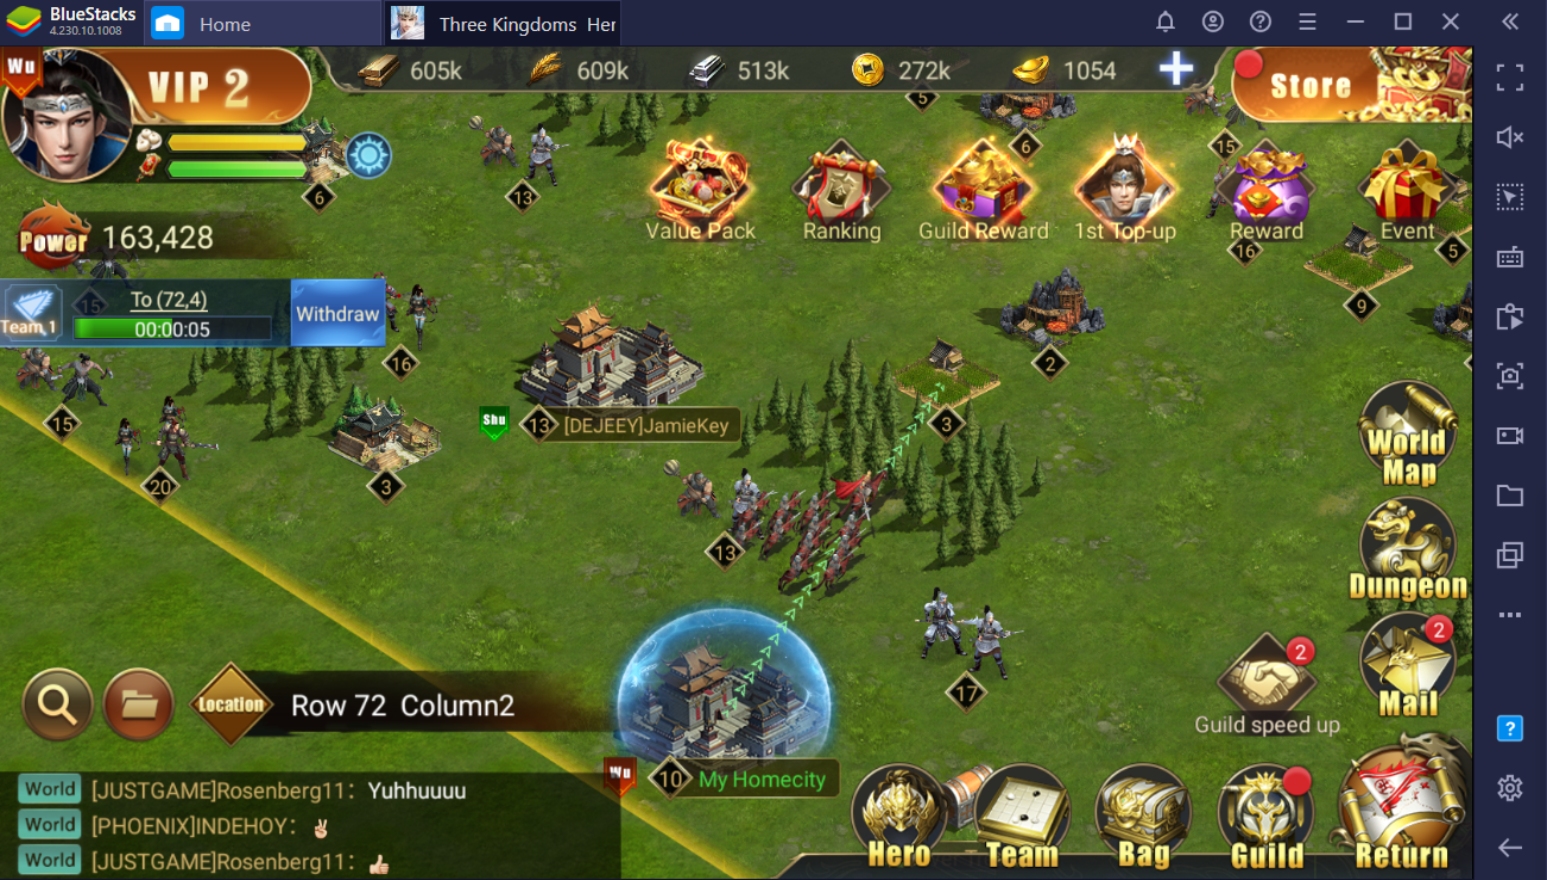 Three Kingdoms: Heroes Saga on PC - Tips and Tricks for Beginners